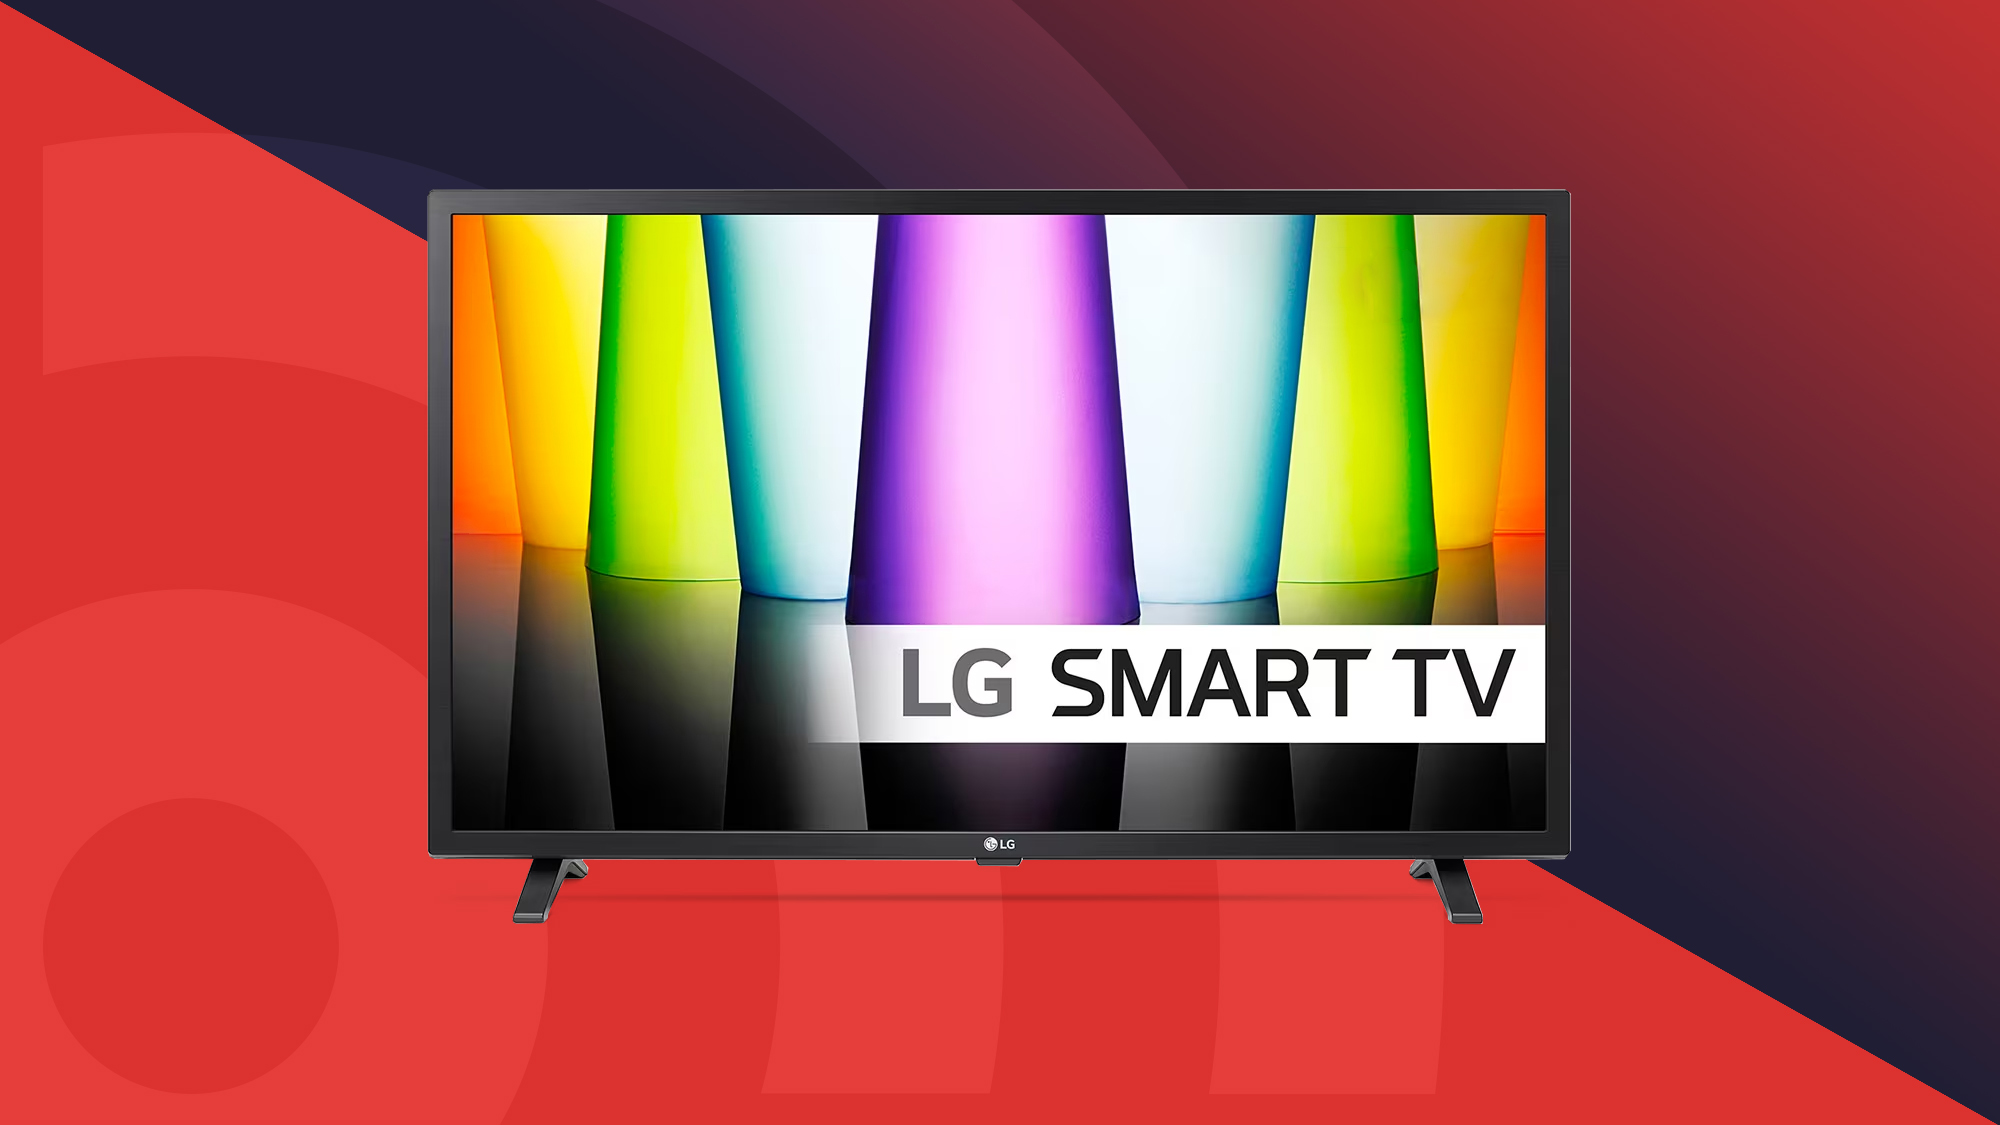 Buy LED TV Online at Lowest Price | LED TV Shopping - Great Eastern Retail